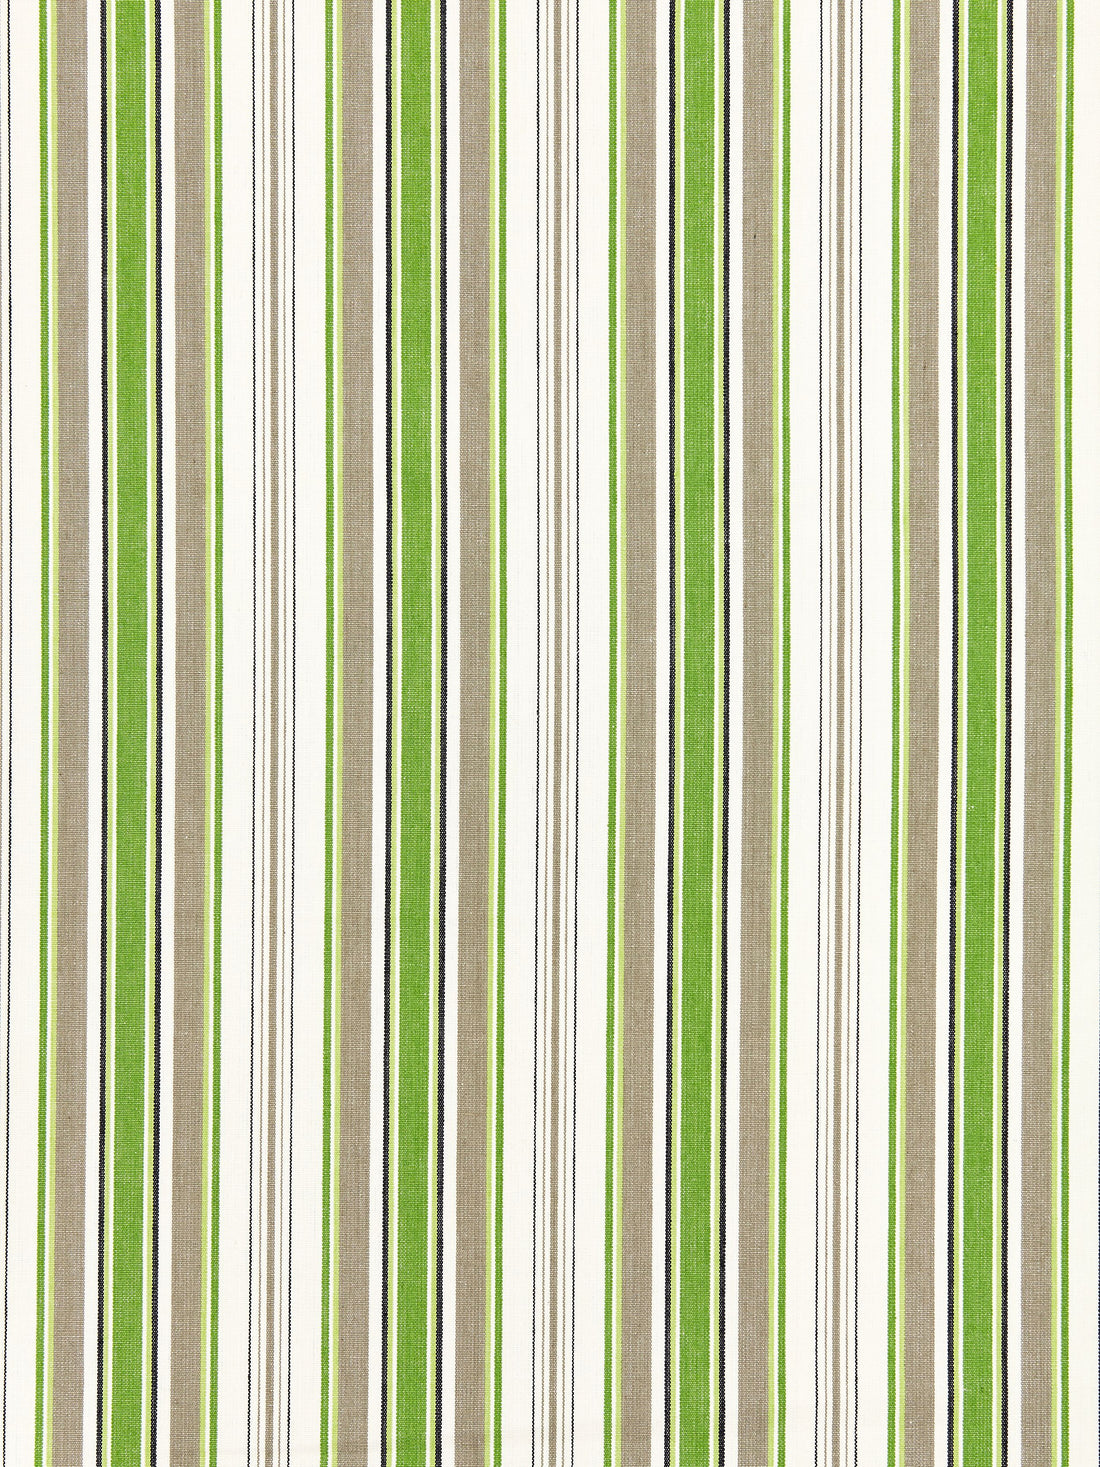 Andover Cotton Stripe fabric in green tea color - pattern number SC 000327113 - by Scalamandre in the Scalamandre Fabrics Book 1 collection